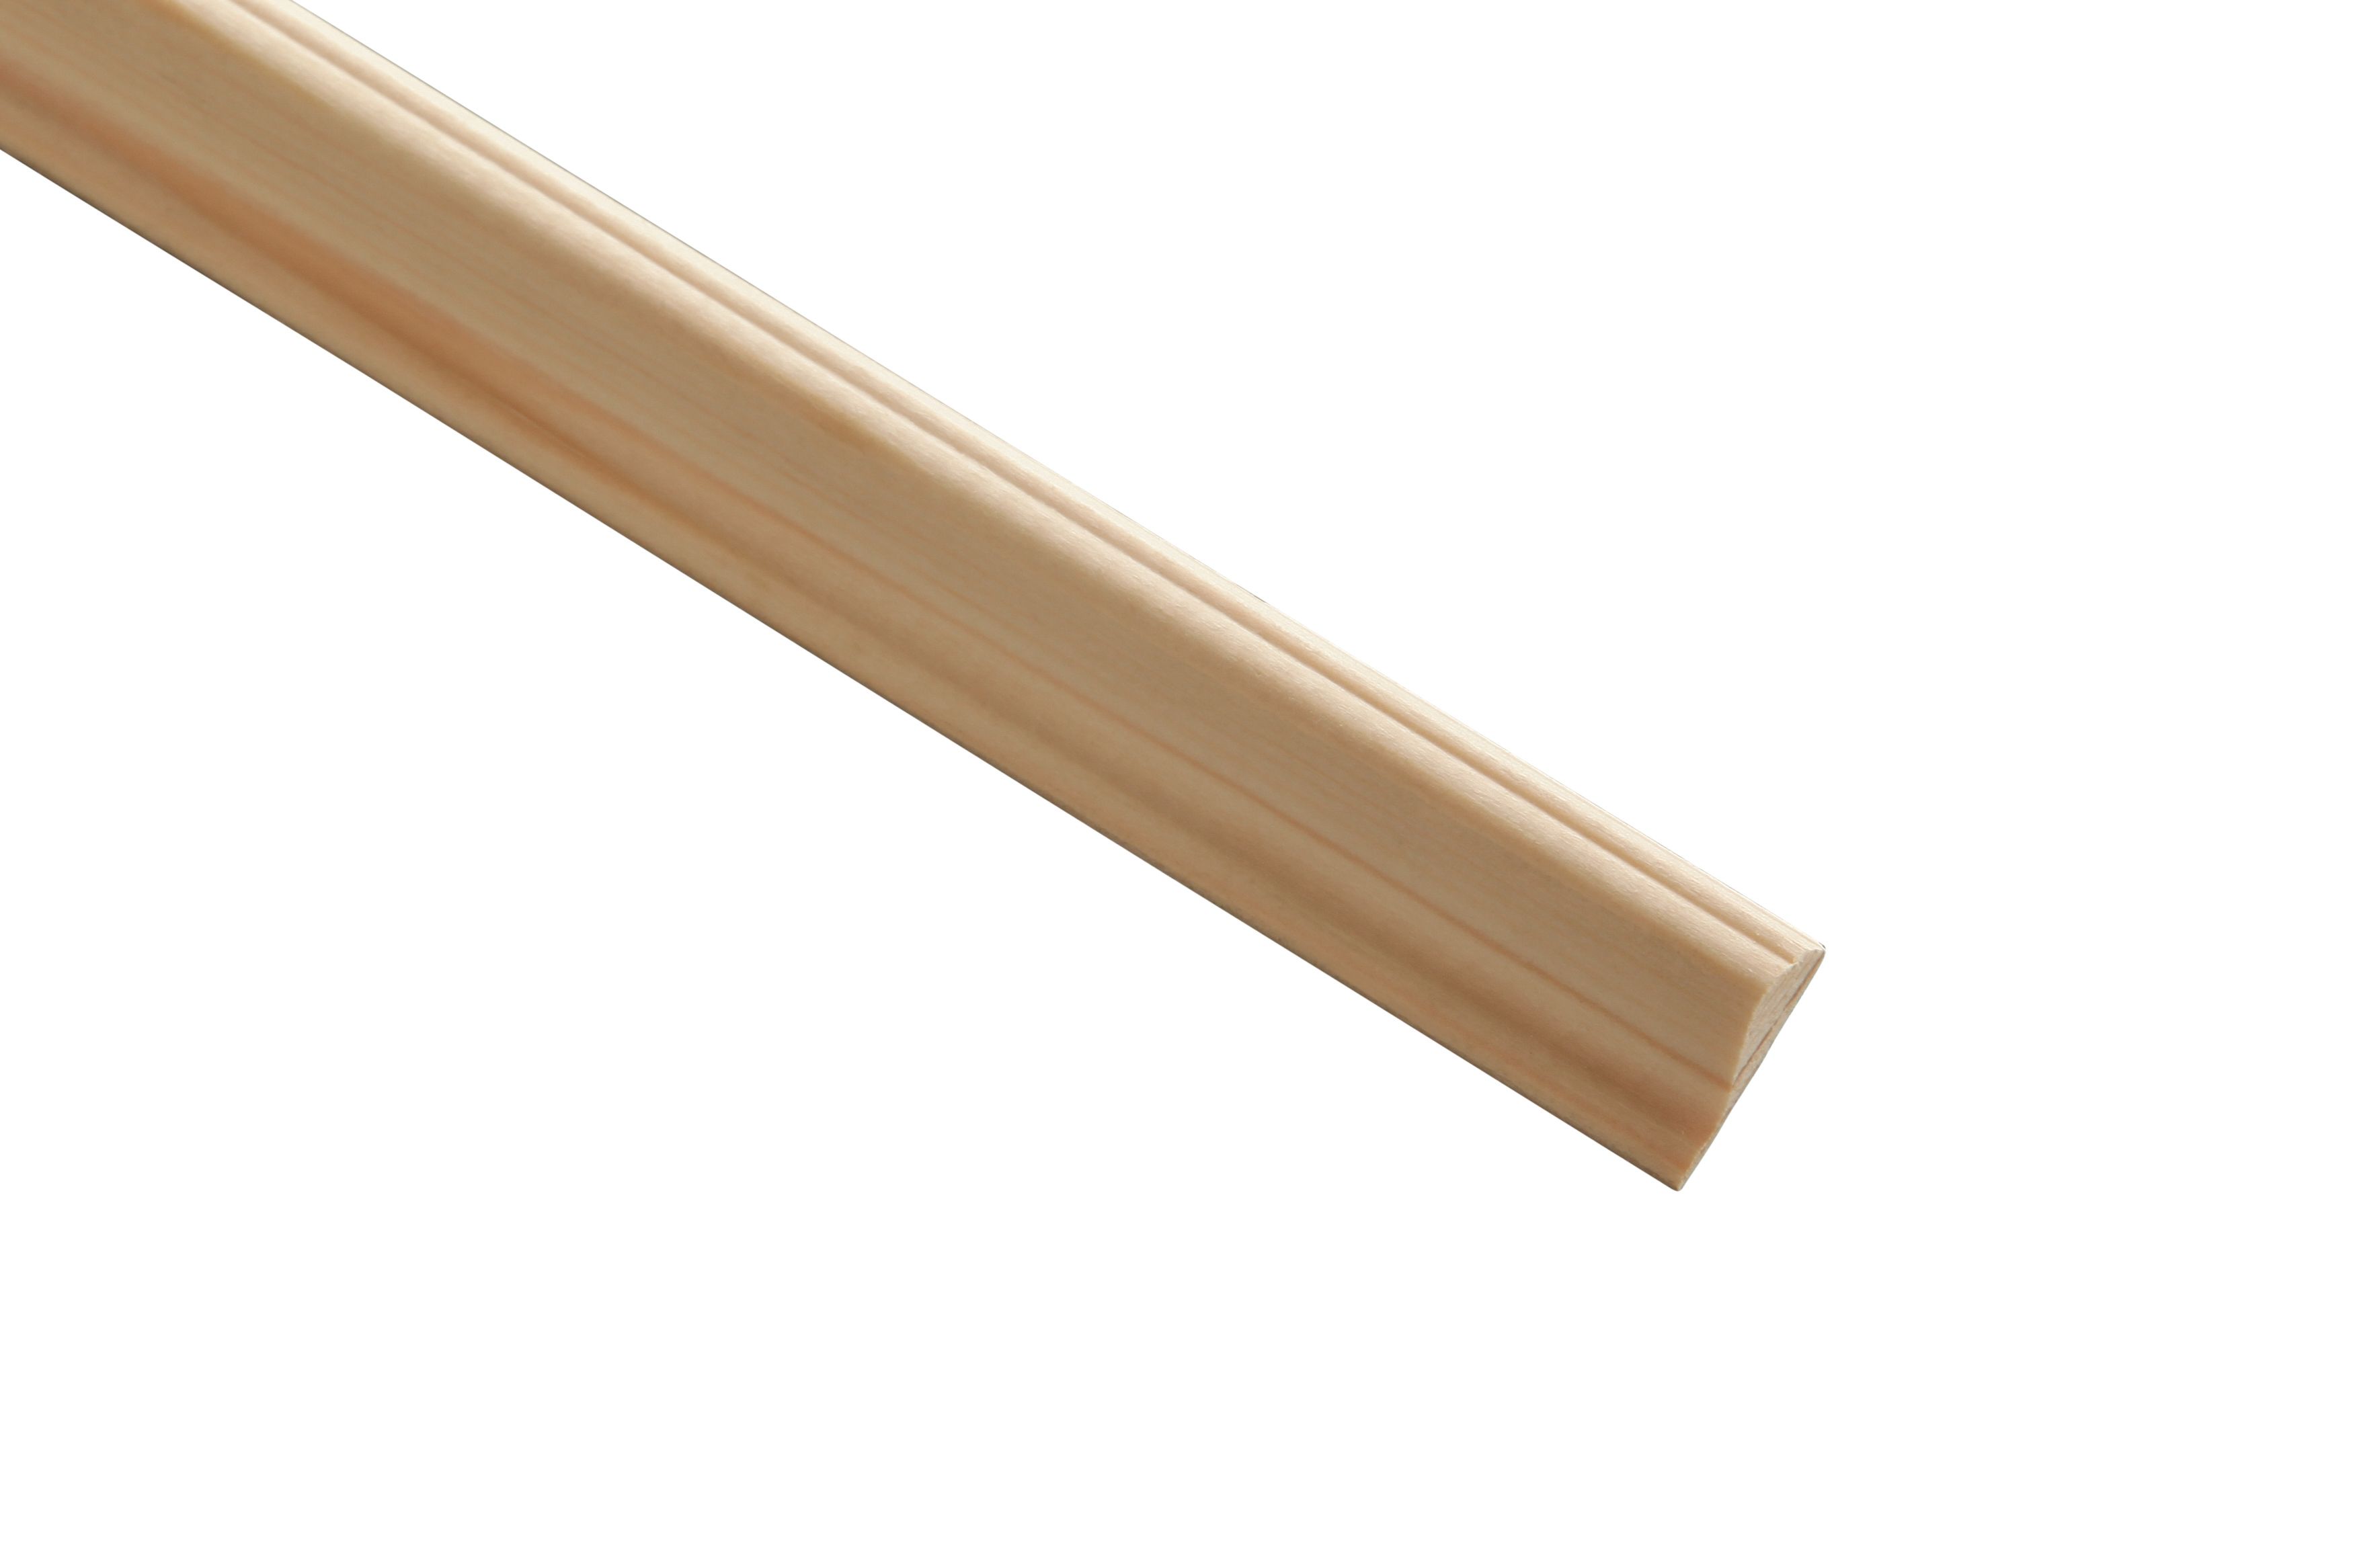 Wickes Pine Decorative Cover Moulding - 8 x 21 x 2400mm